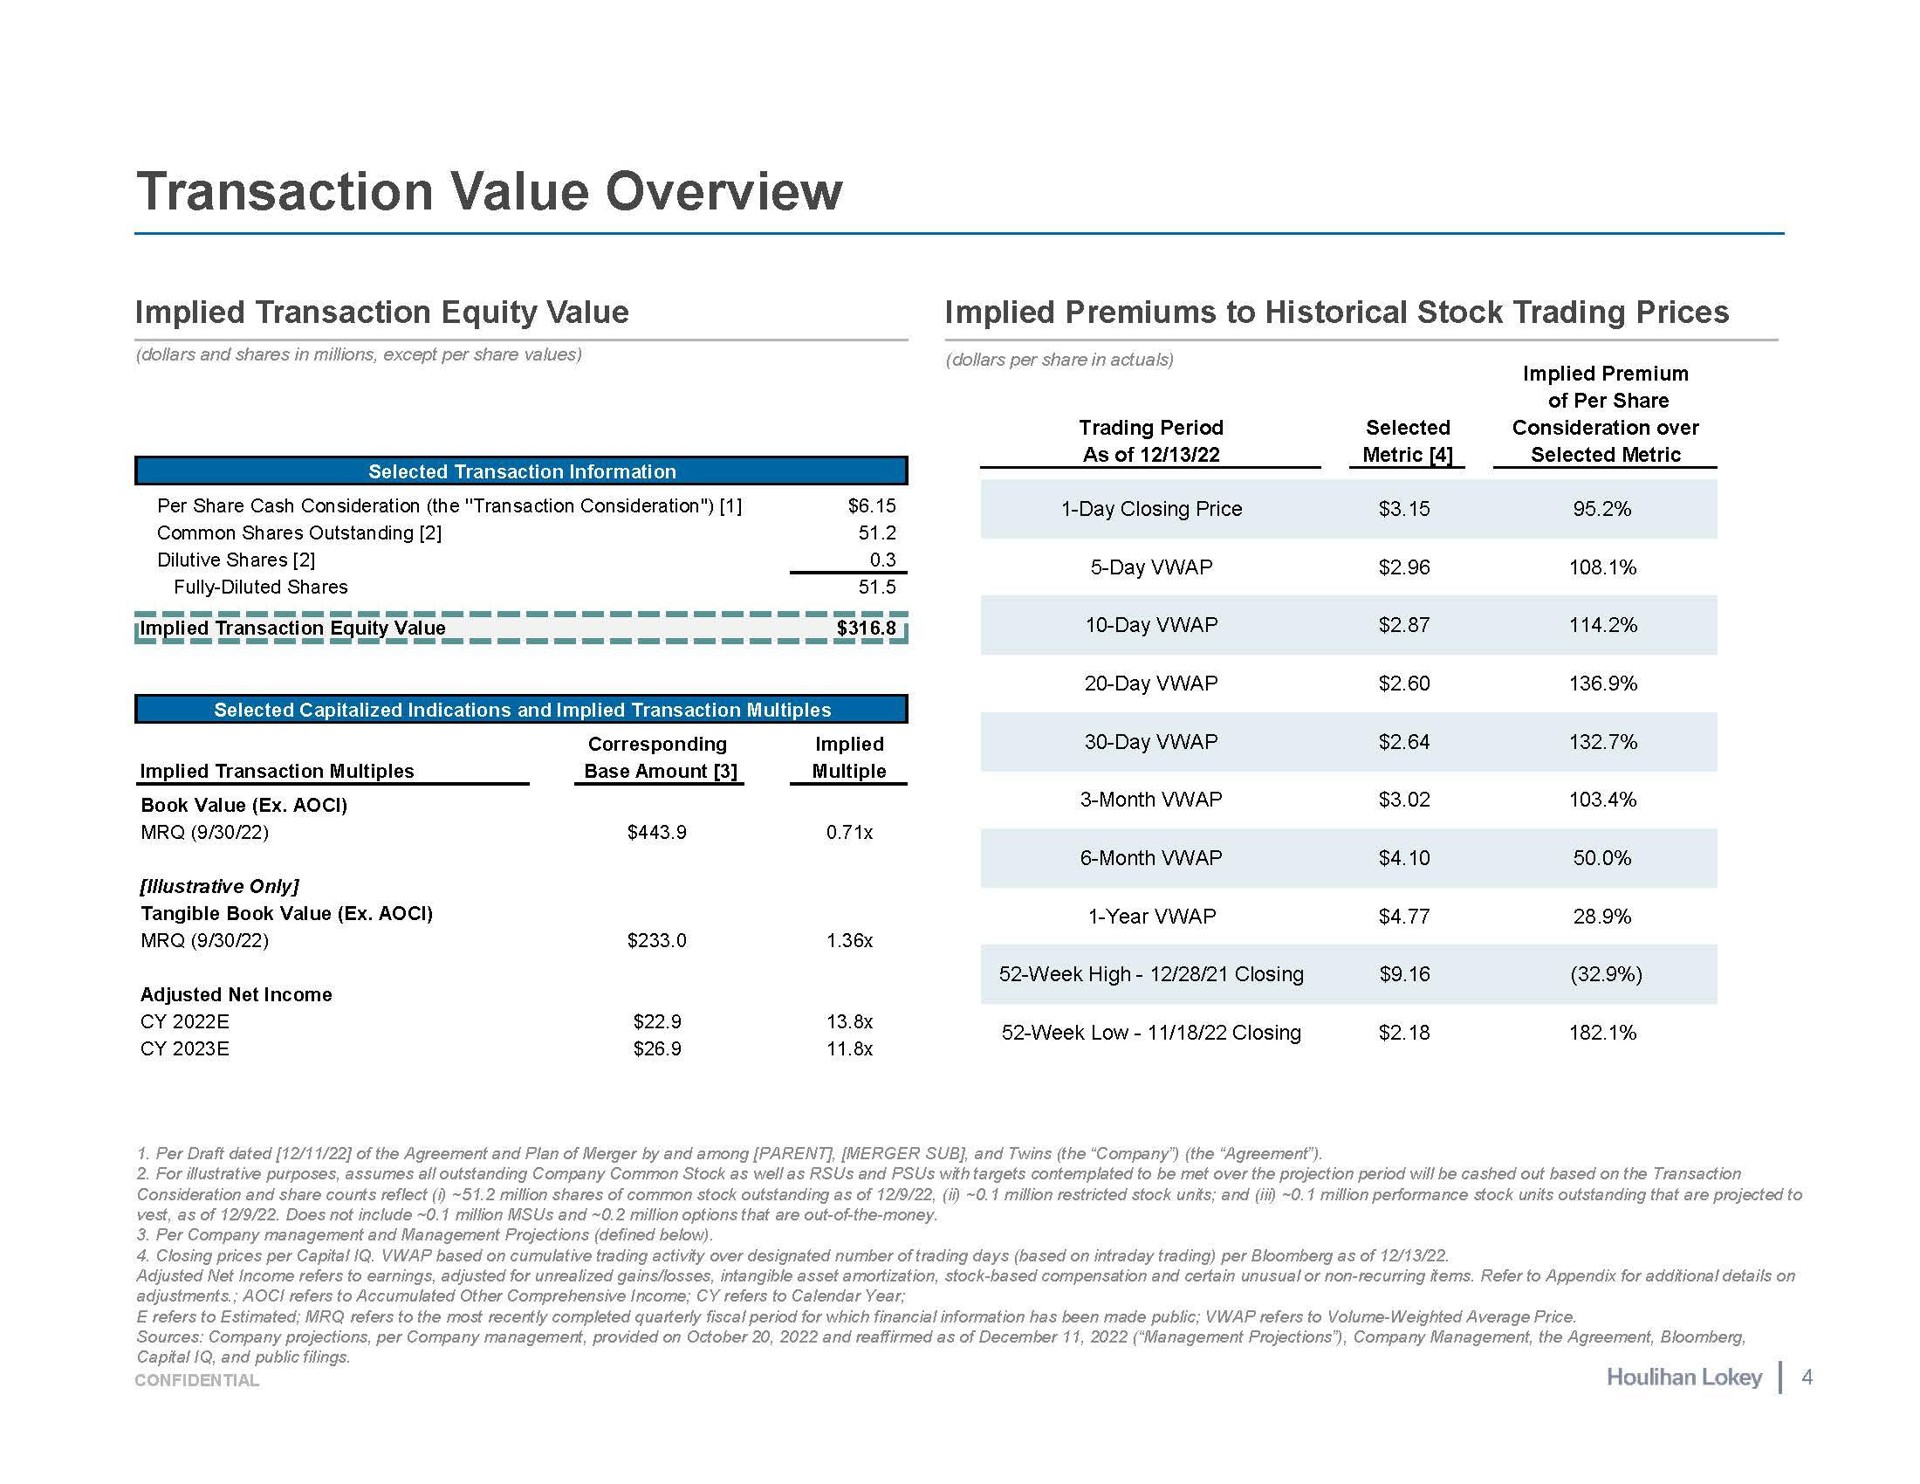 transaction value overview implied transaction equity value implied premiums to historical stock trading prices is multiple transaction multiples | Houlihan Lokey